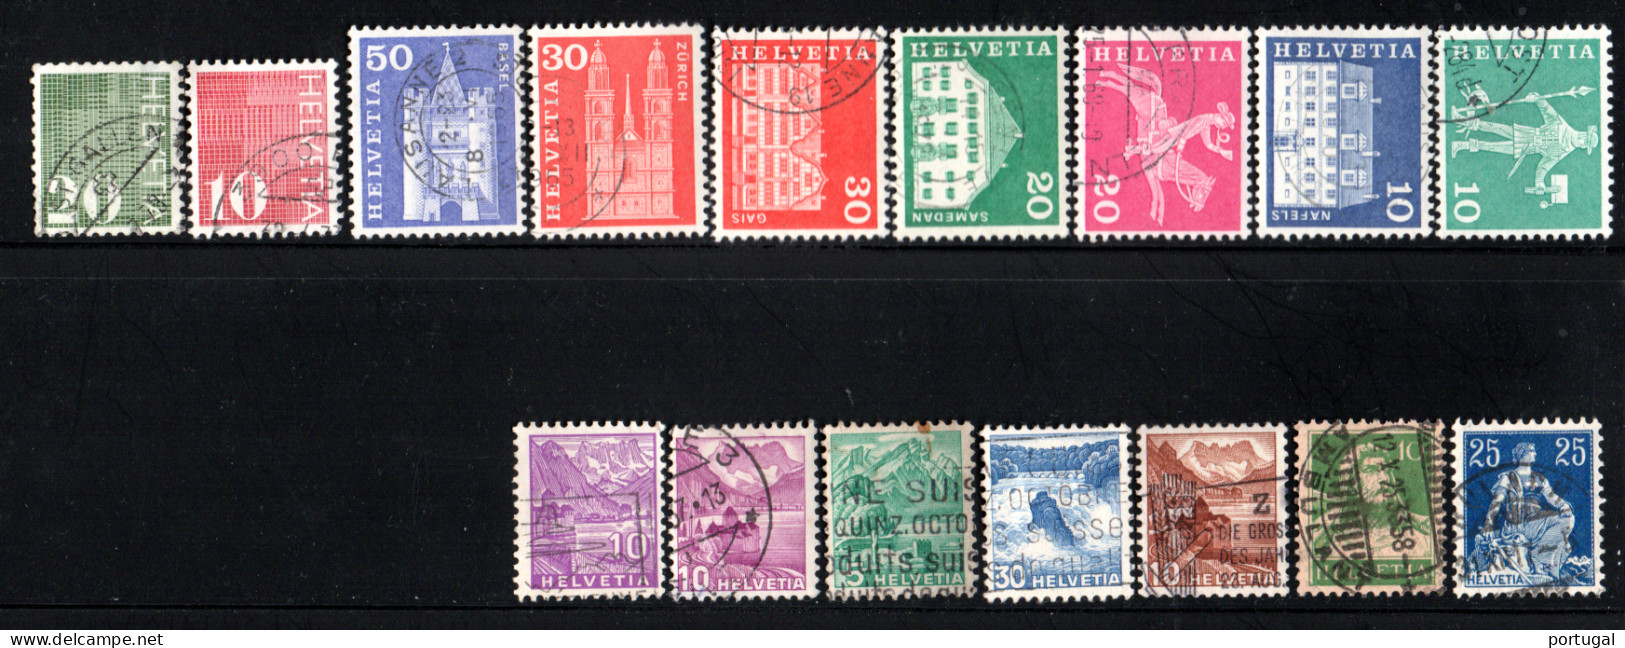 Suisse ( 42 Timbres Obliteres ) - Collections